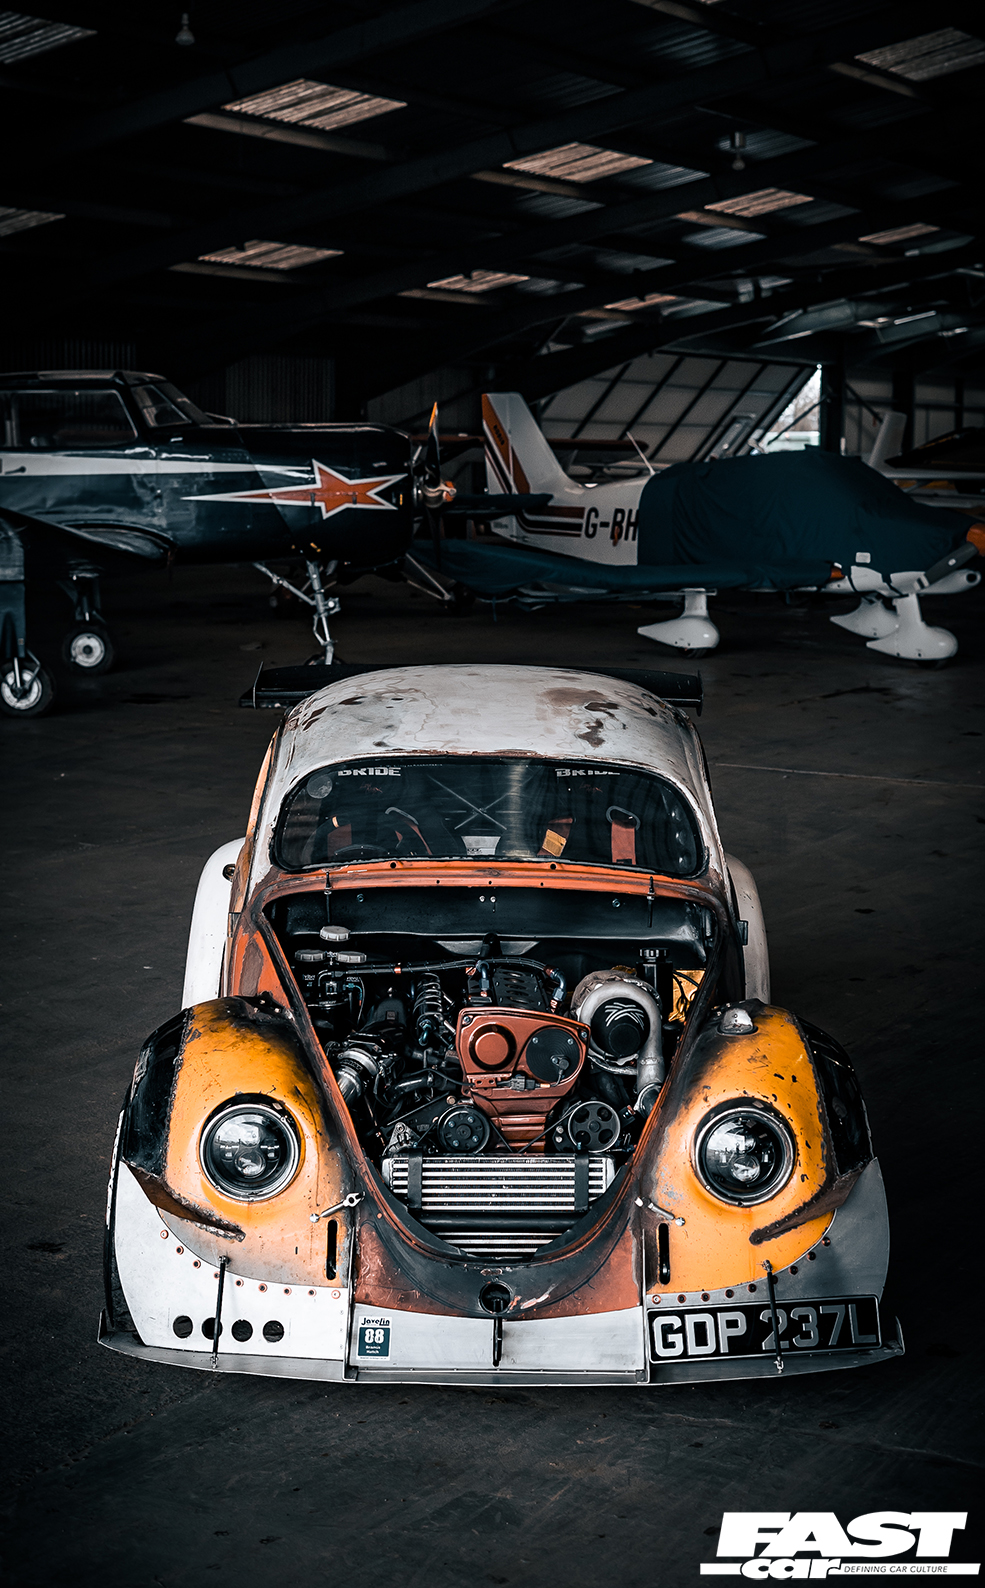 VW Beetle with RB25 engine